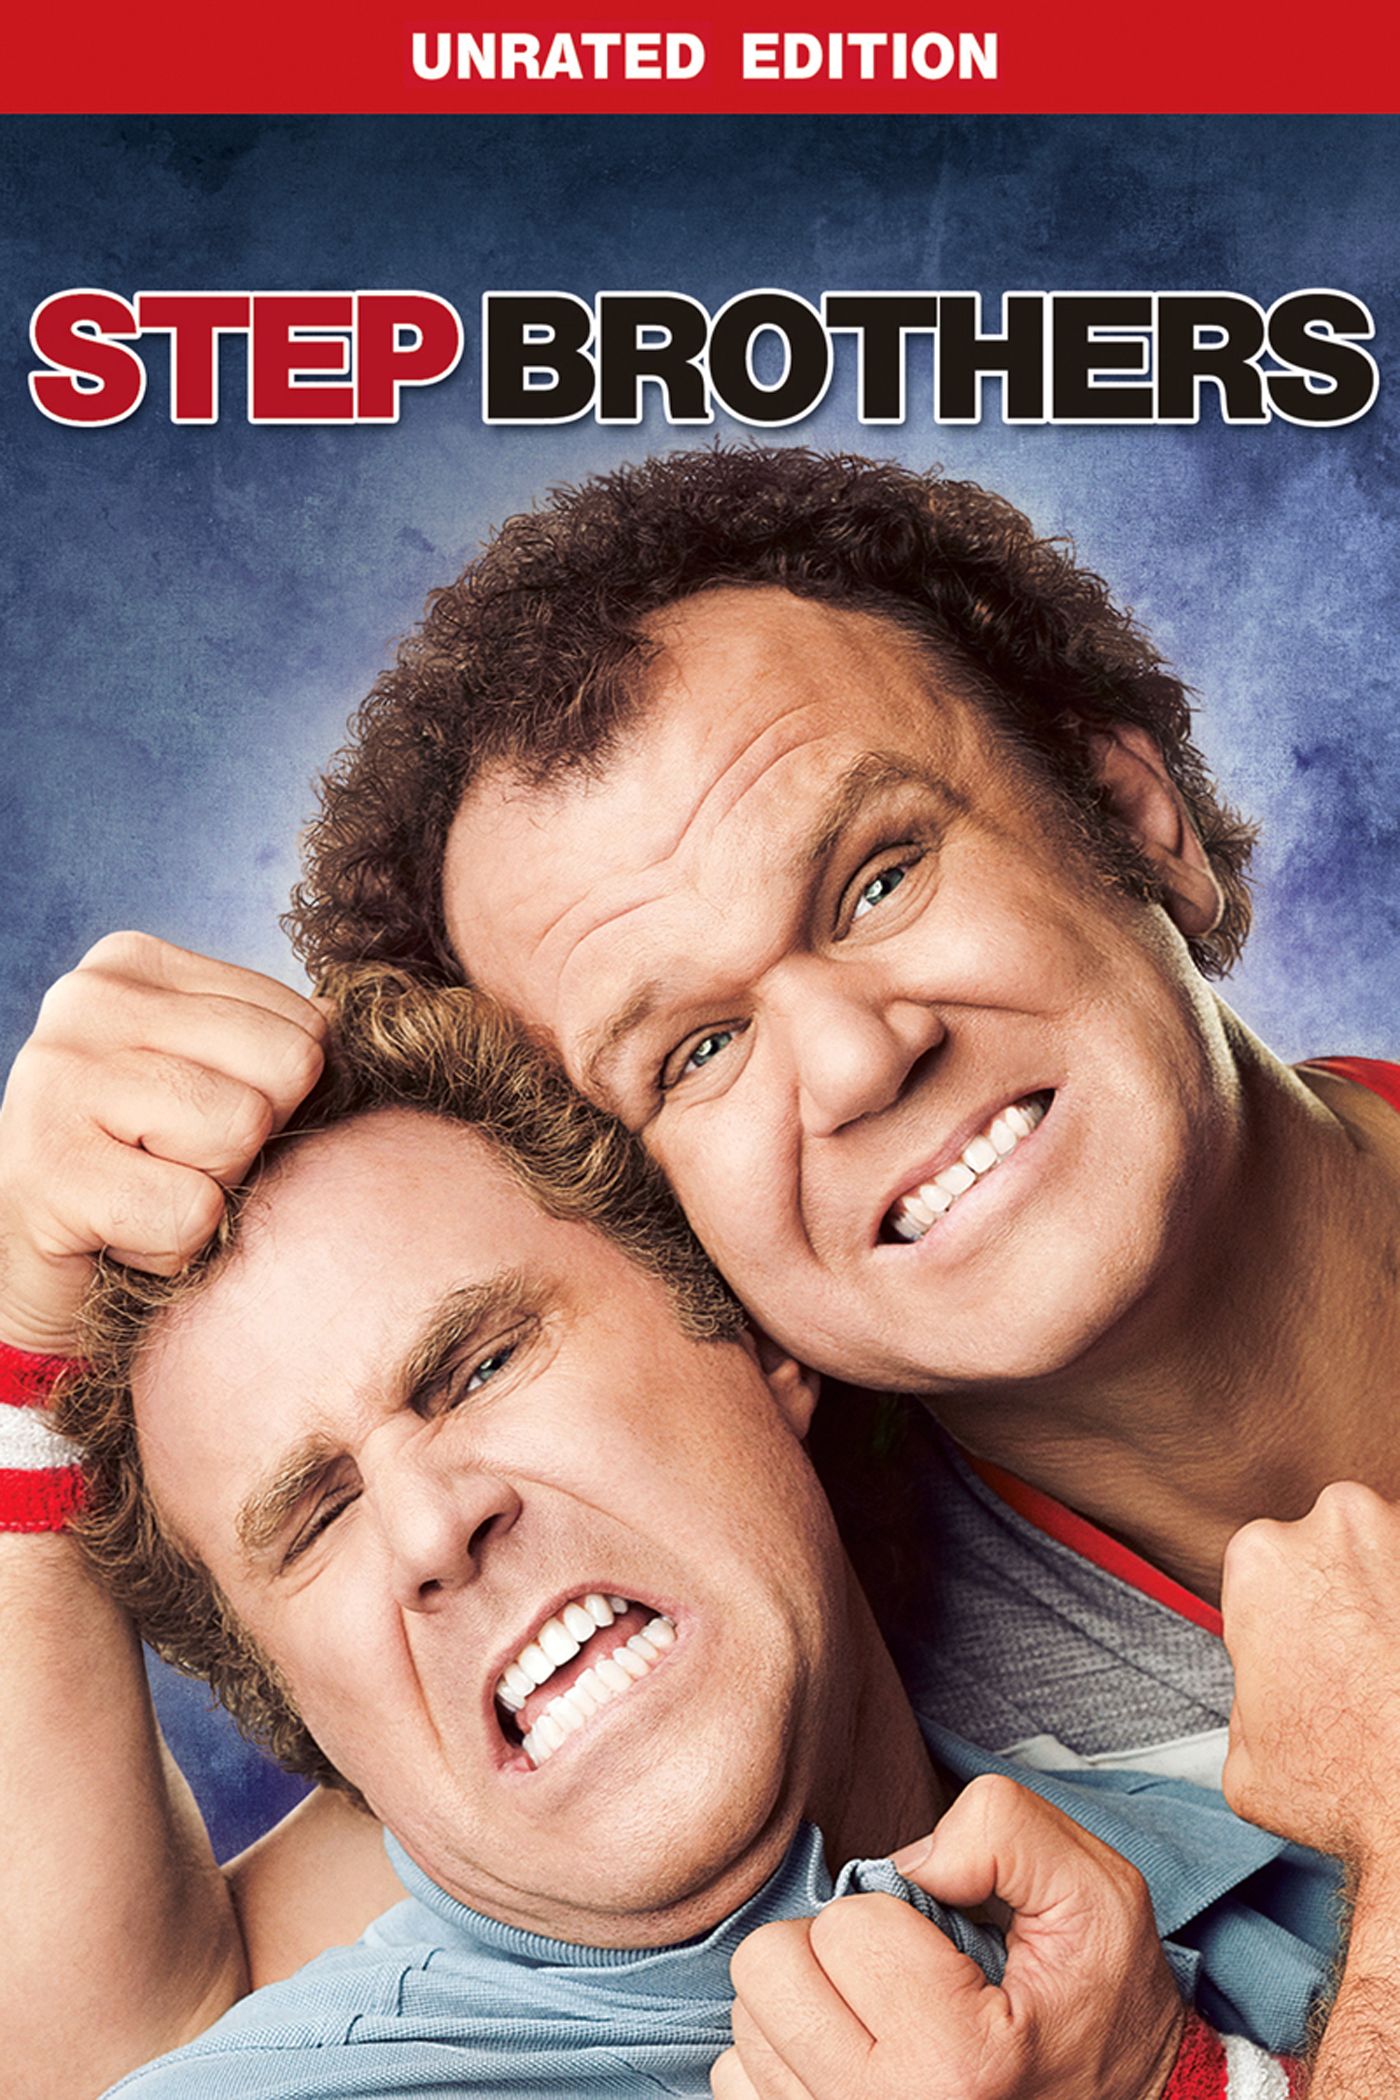 don hung recommends step brothers movie download pic